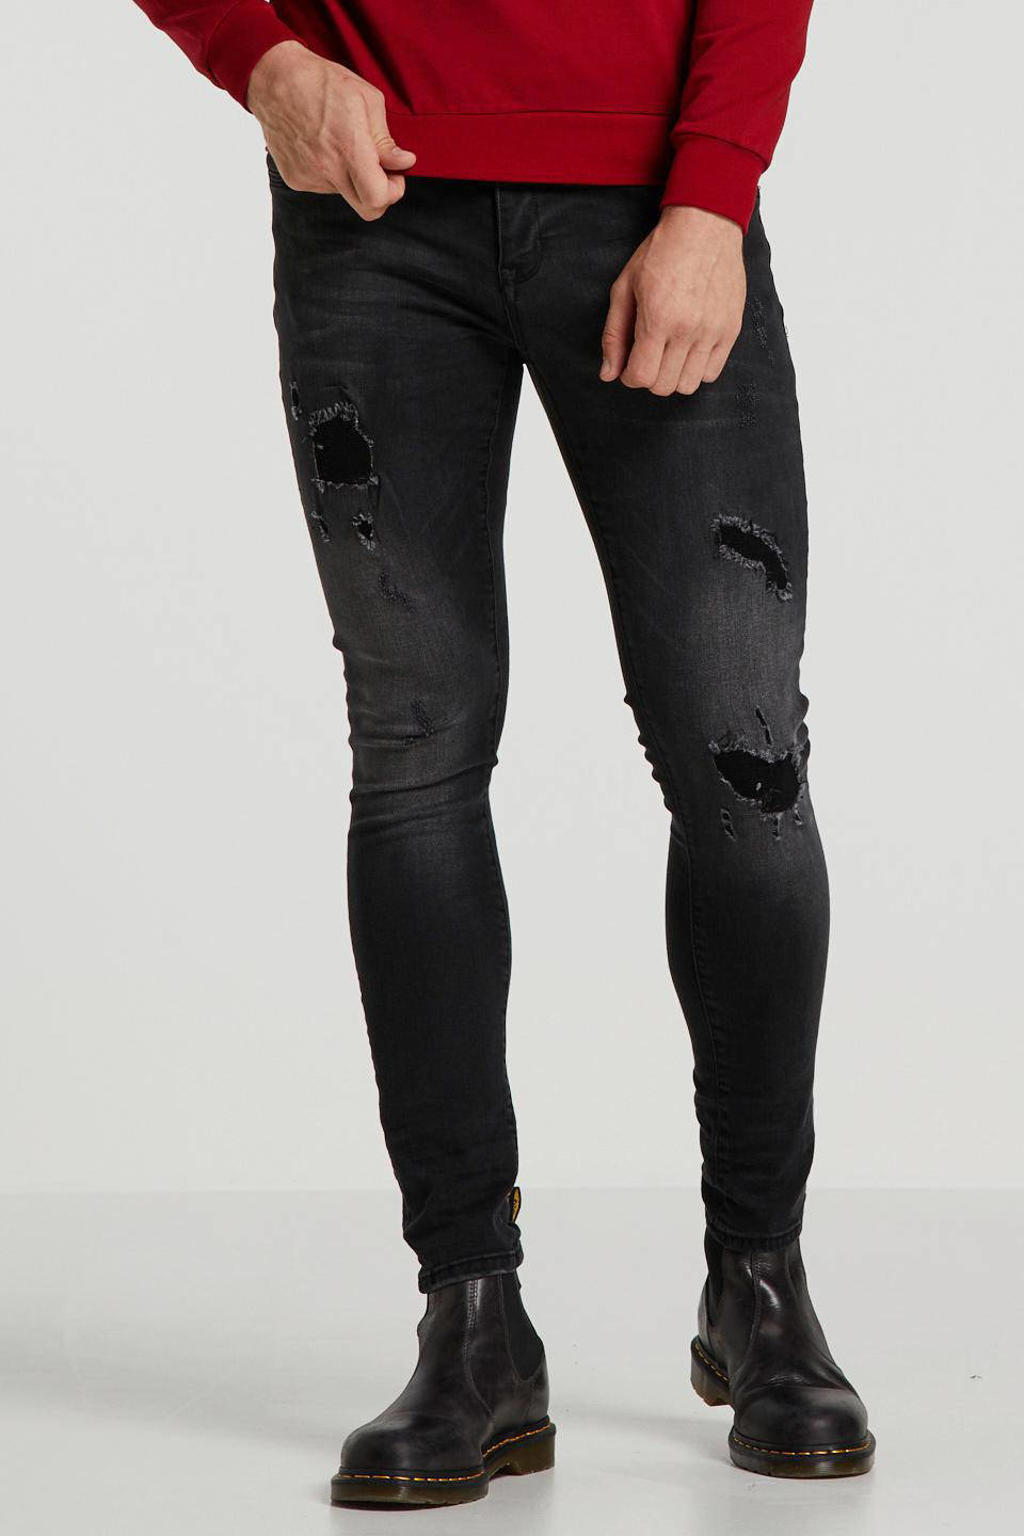 GABBIANO skinny jeans Ultimo black destroyed